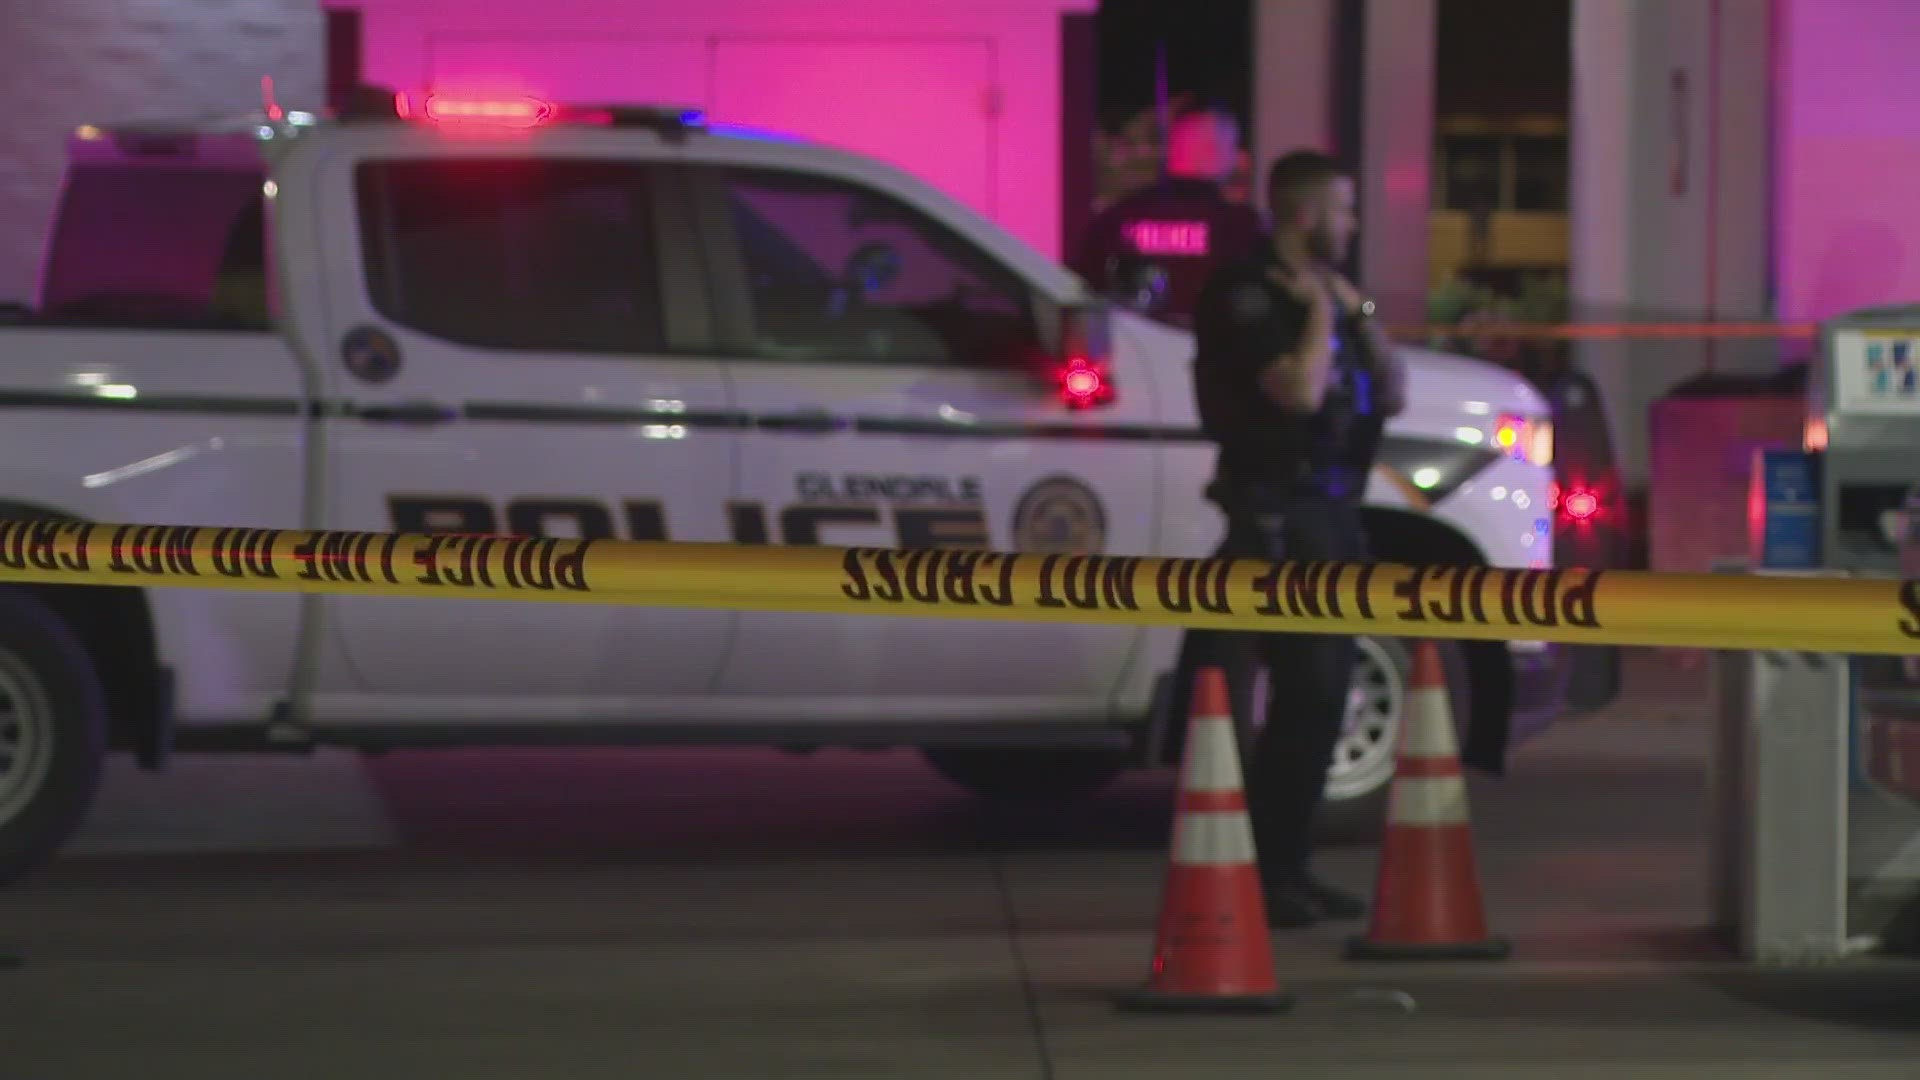 Police said that the shooting happened near 51st and Glendale avenues late Friday night.